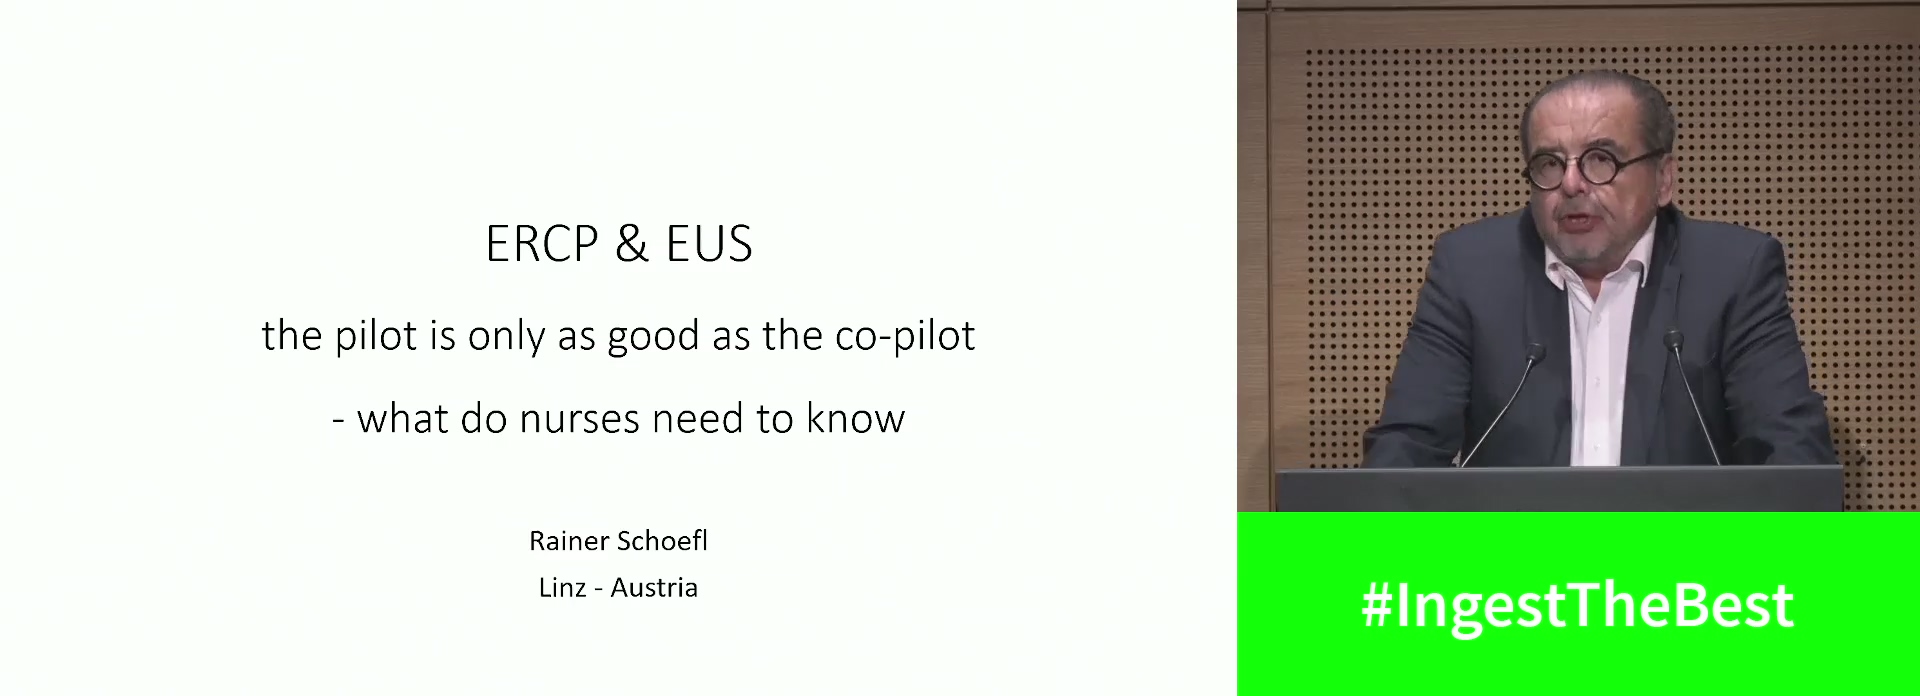 ERCP and EUS: The pilot is only as good as the co-pilot. What nurses need to know